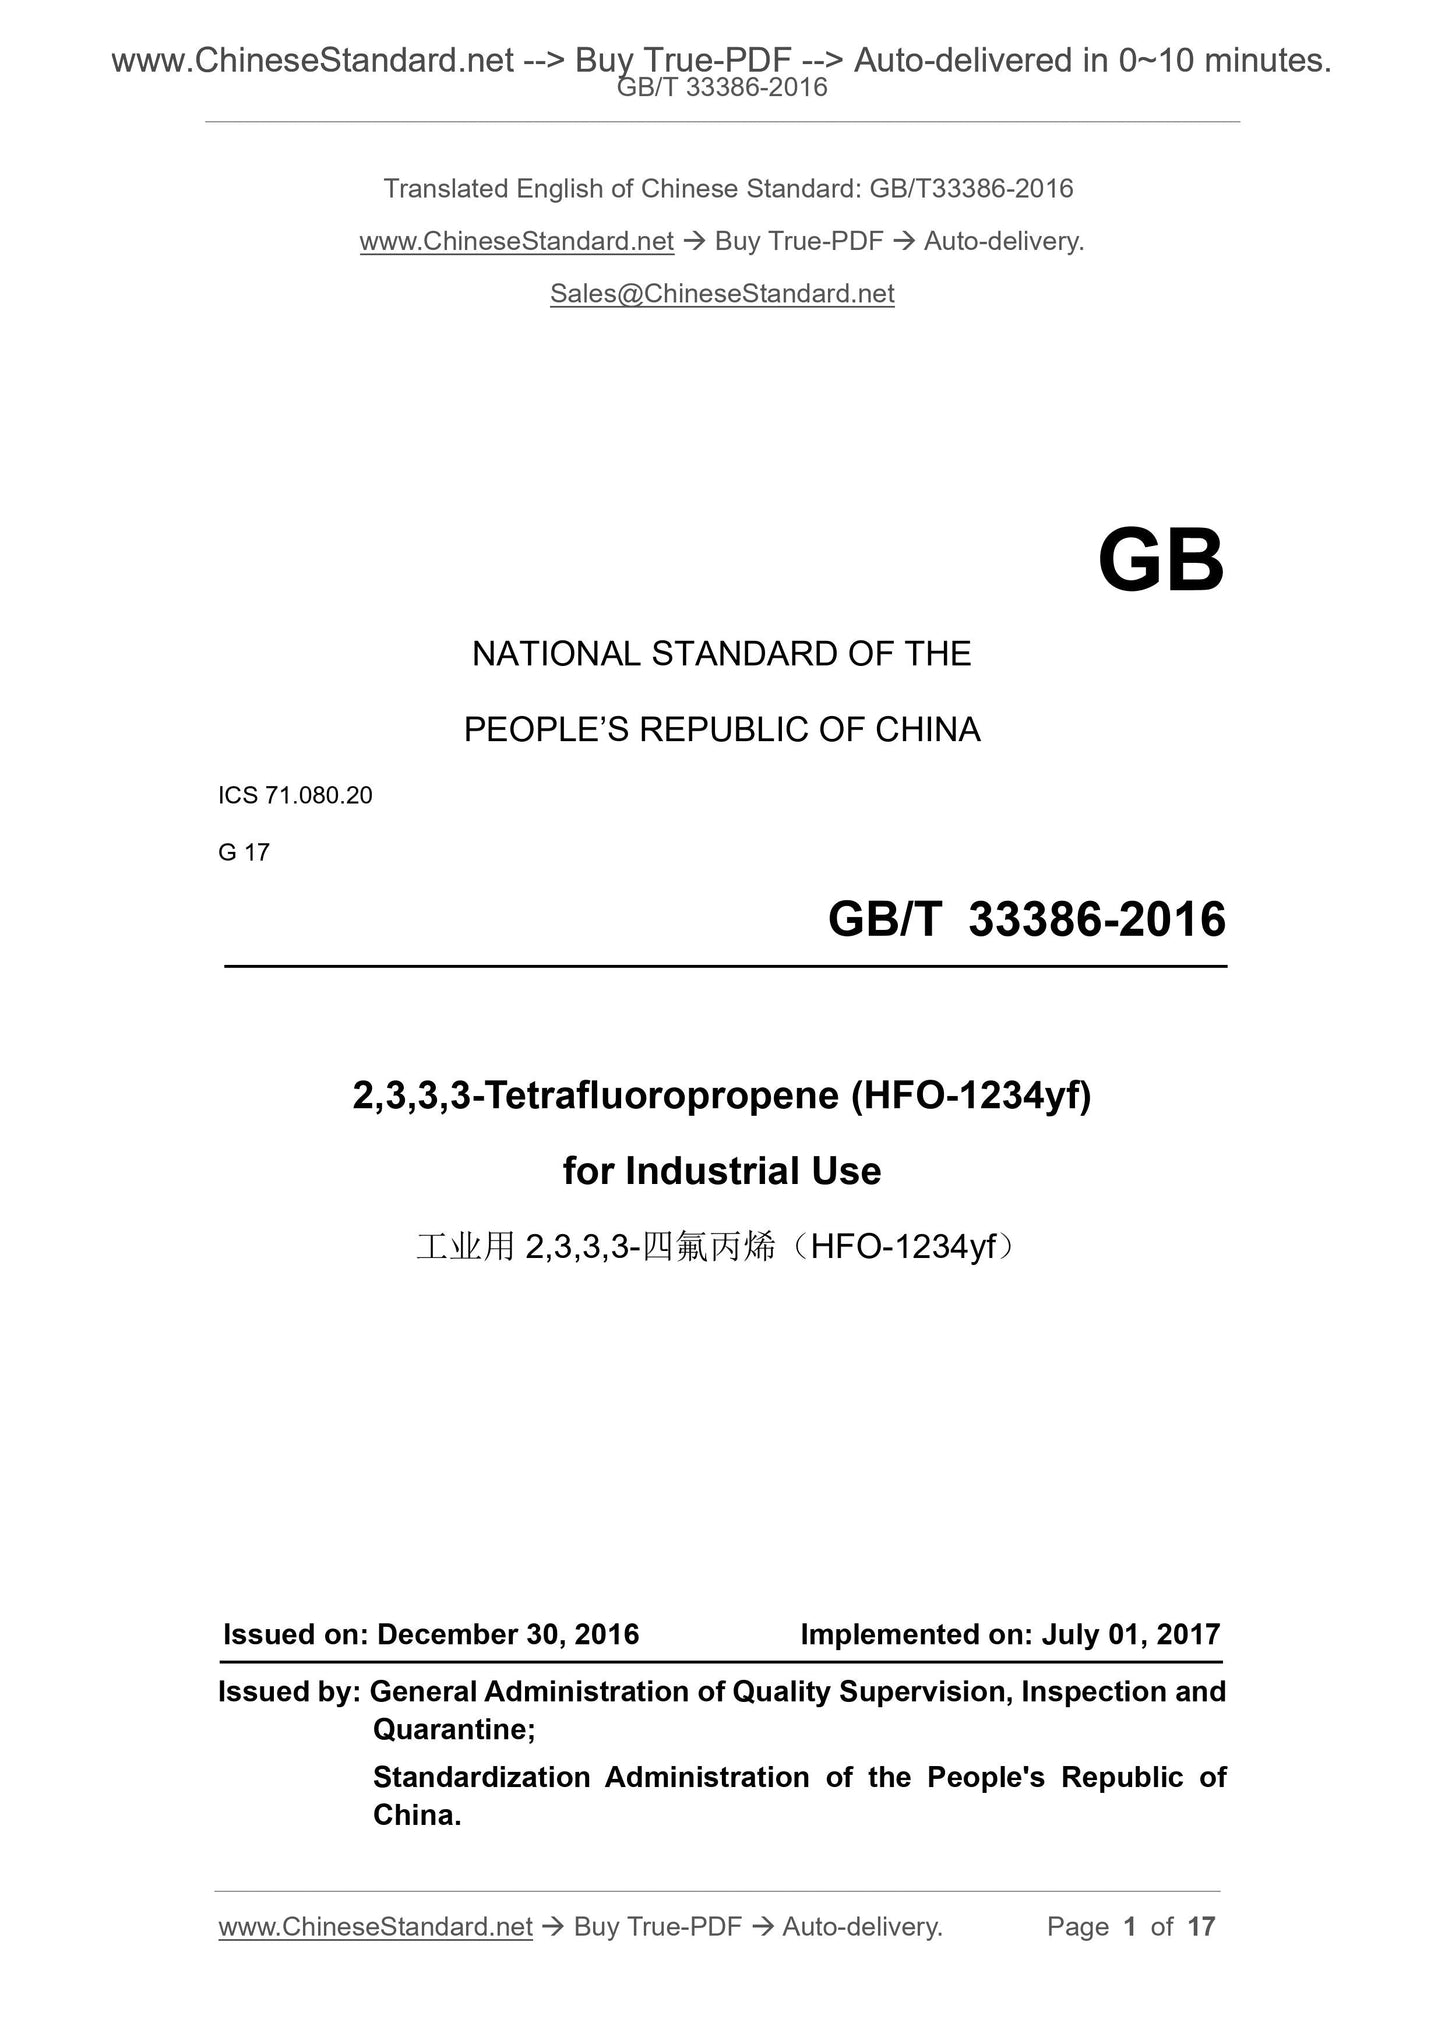 GB/T 33386-2016 Page 1